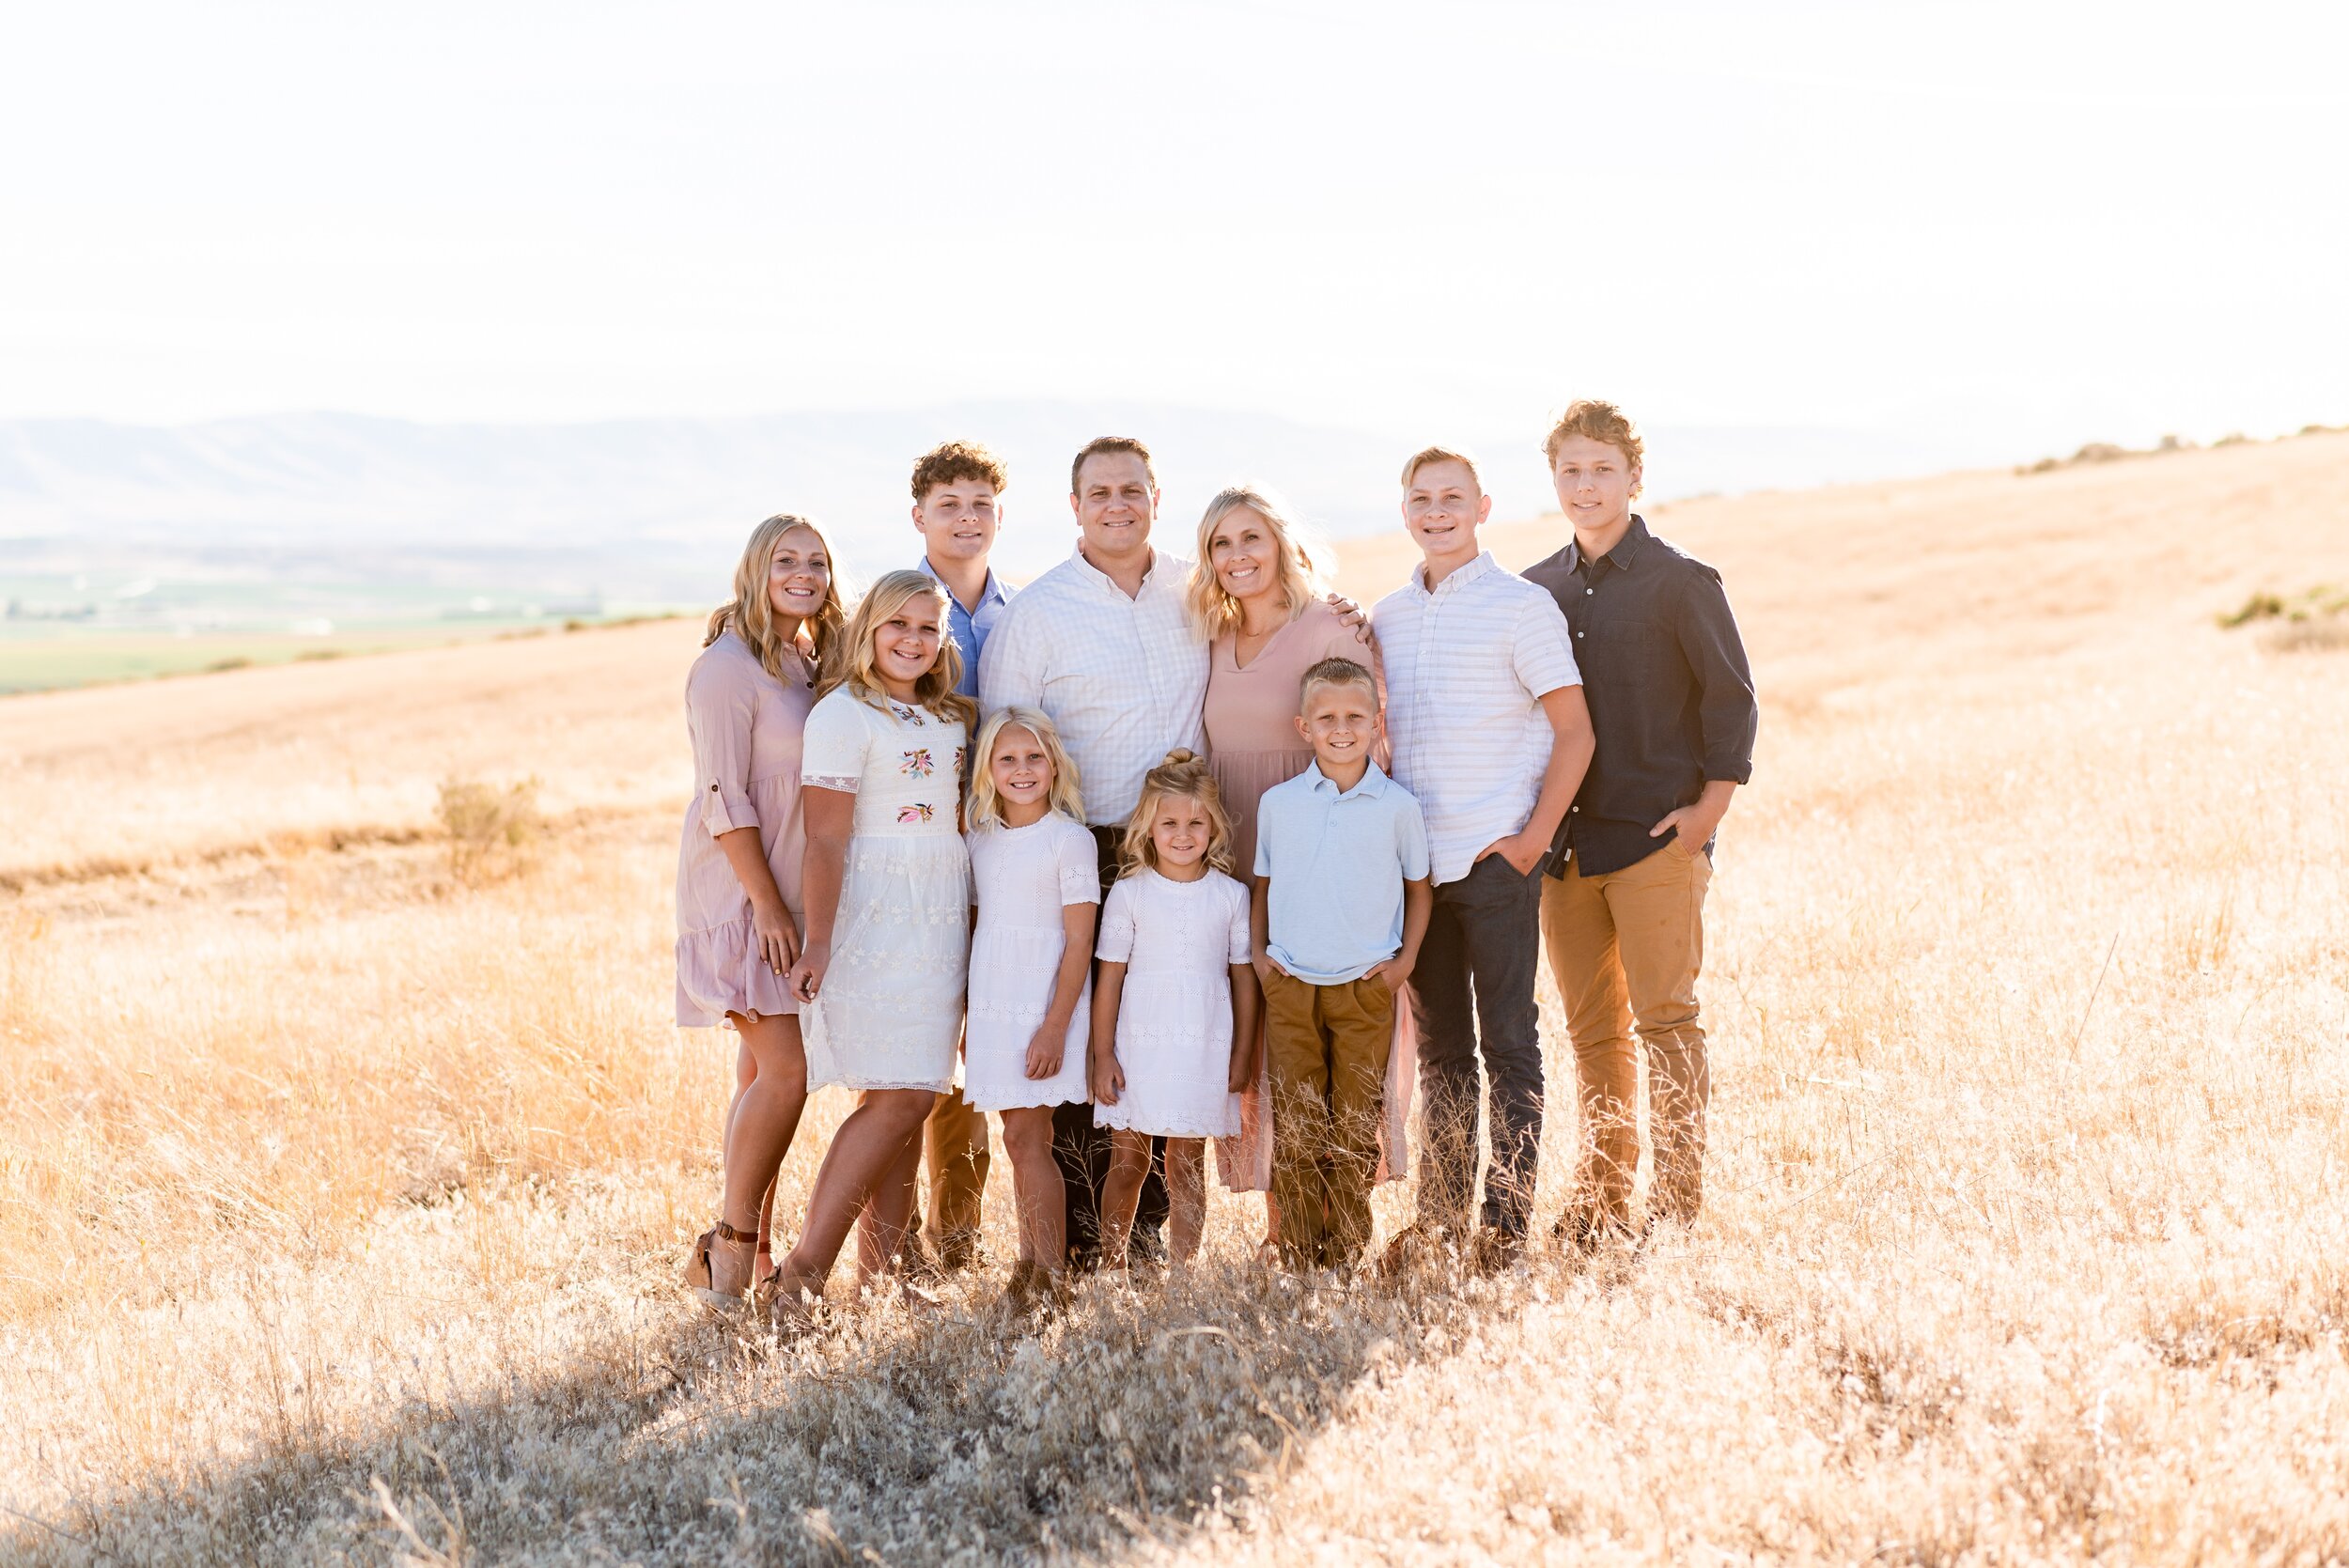 Royal City Large Family Session - Family of 10 Pose - What to Wear to Family Photos - Royal City Family Photographer - Tri Cities Family Photographer - Morgan Tayler Photo &amp; Design